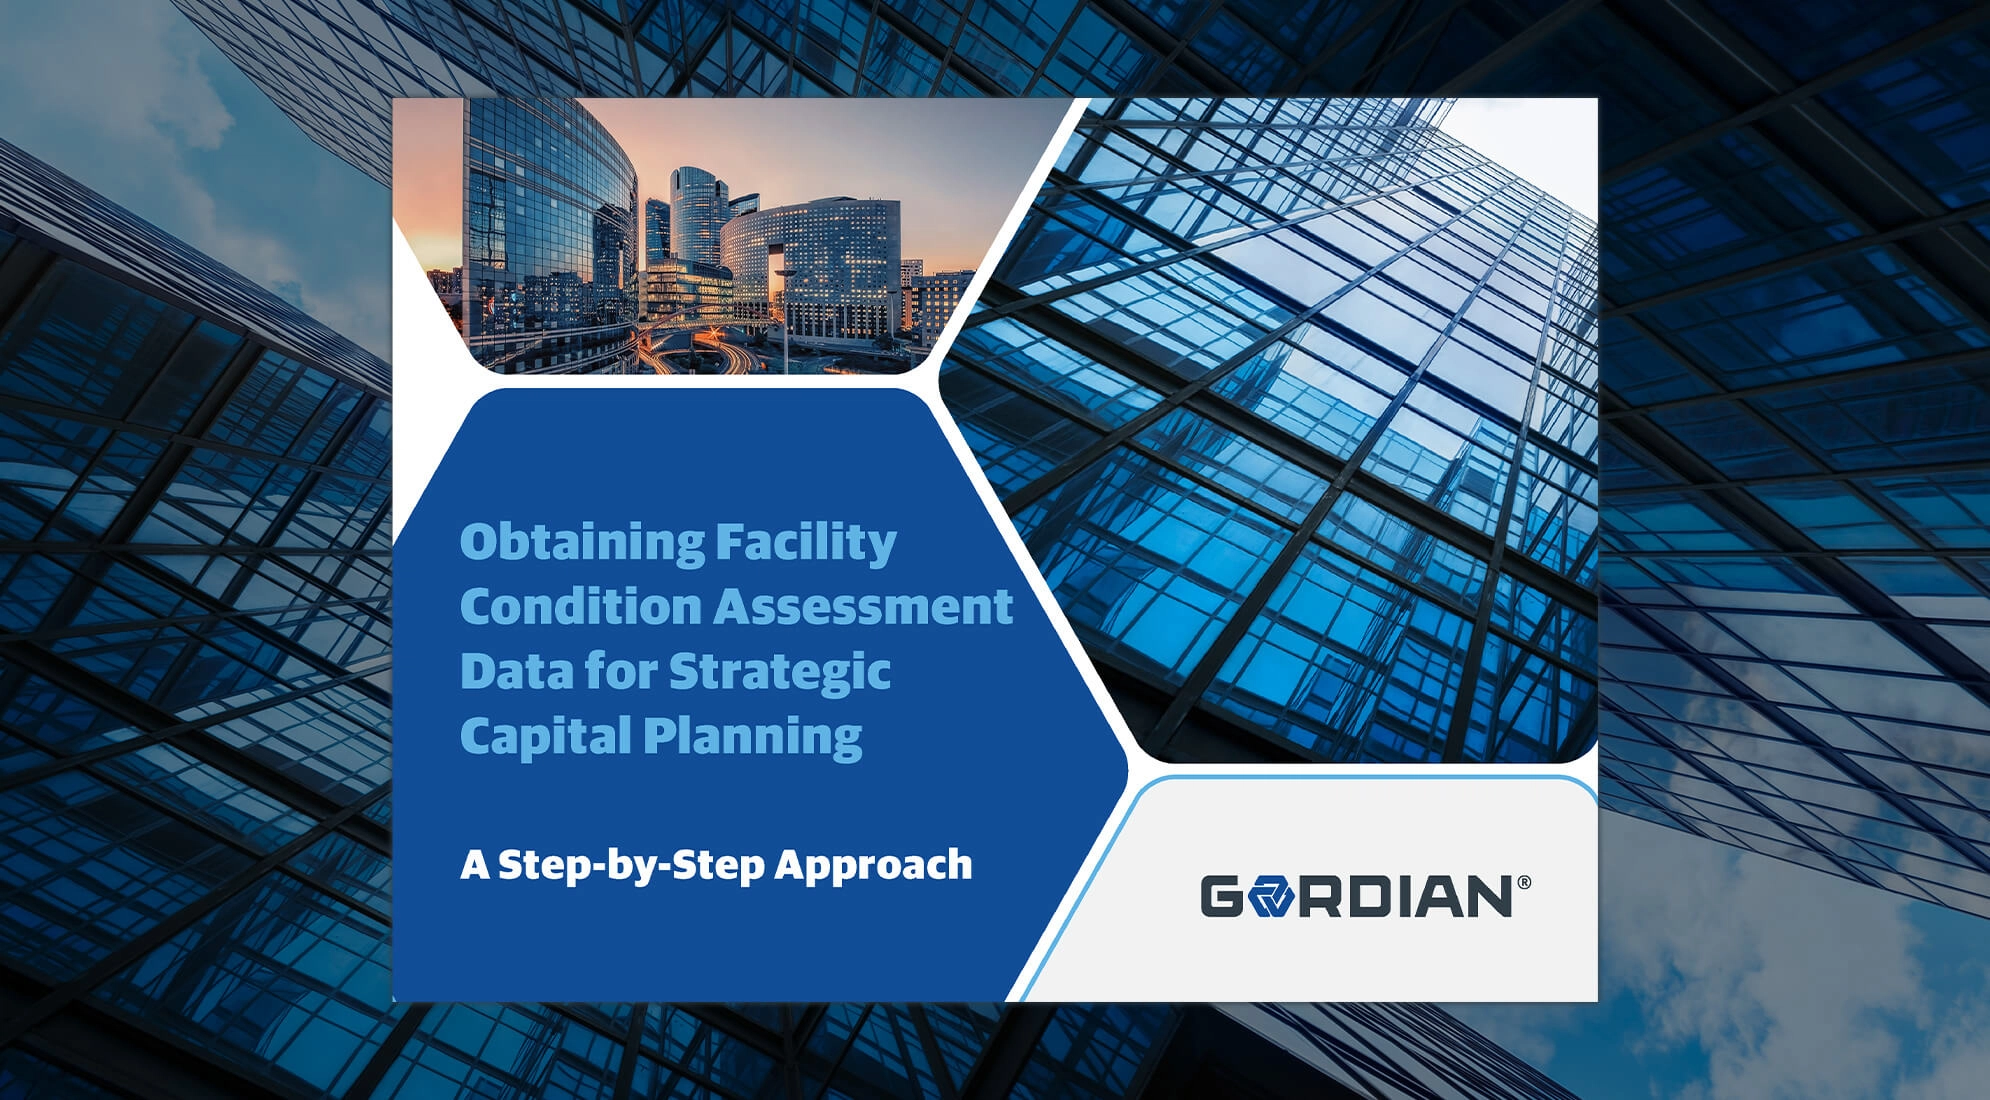 Obtaining Facility Condition Assessment Data for Strategic Capital Planning 3